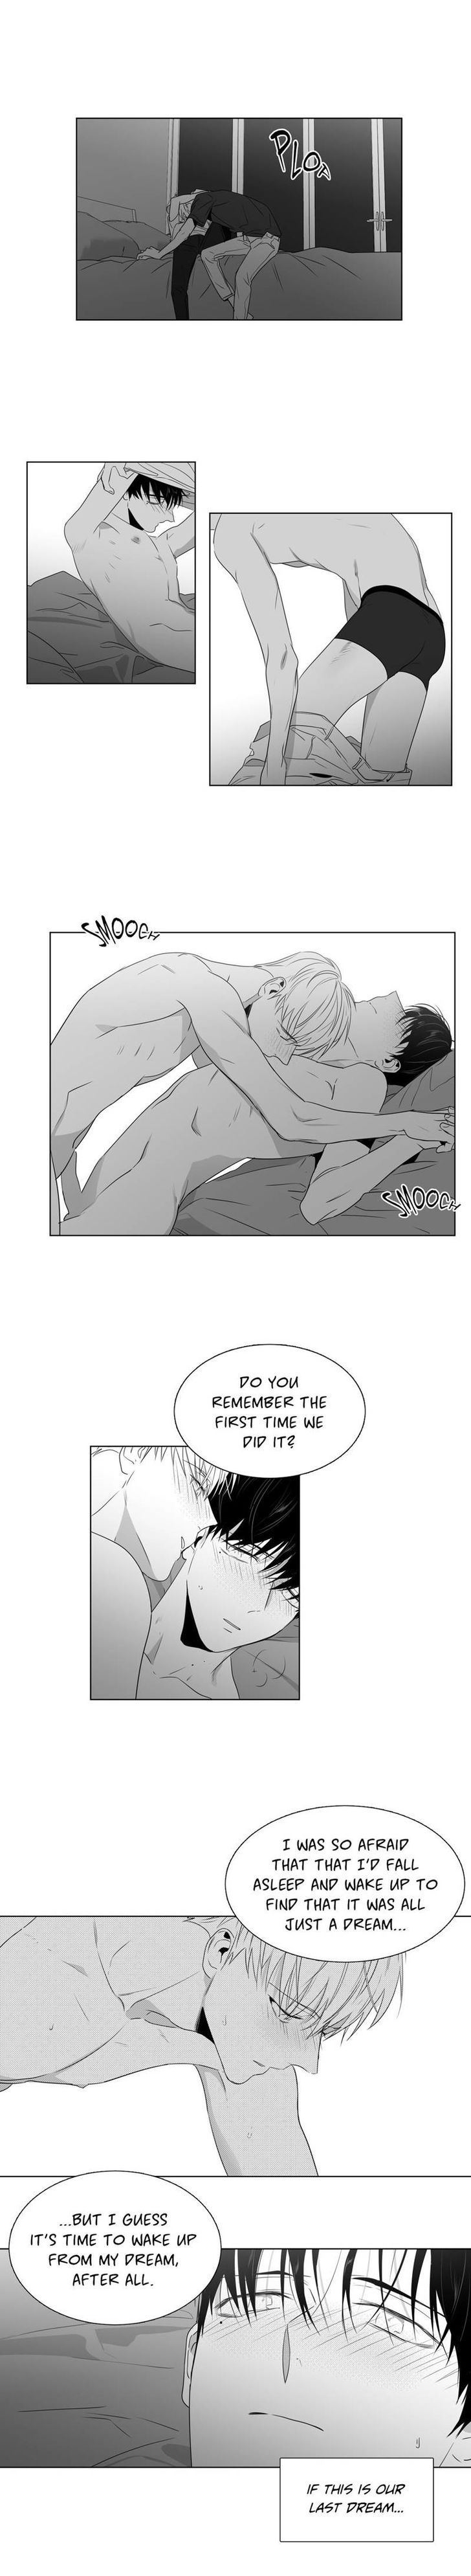 Lover Boy (Lezhin) Chapter 047 page 3